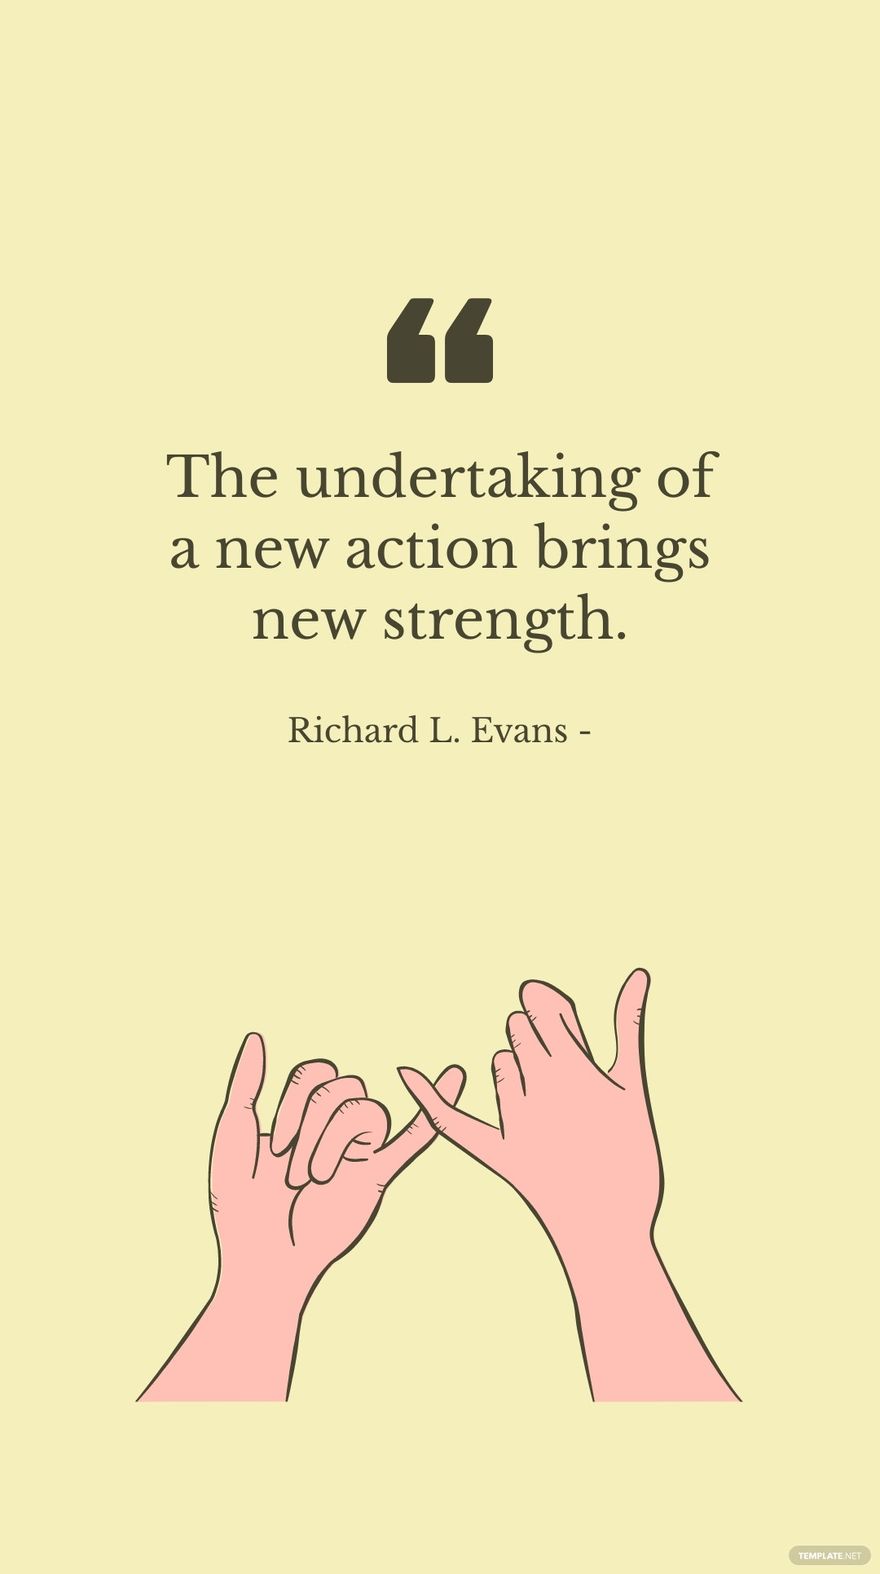 Richard L. Evans - The undertaking of a new action brings new strength.